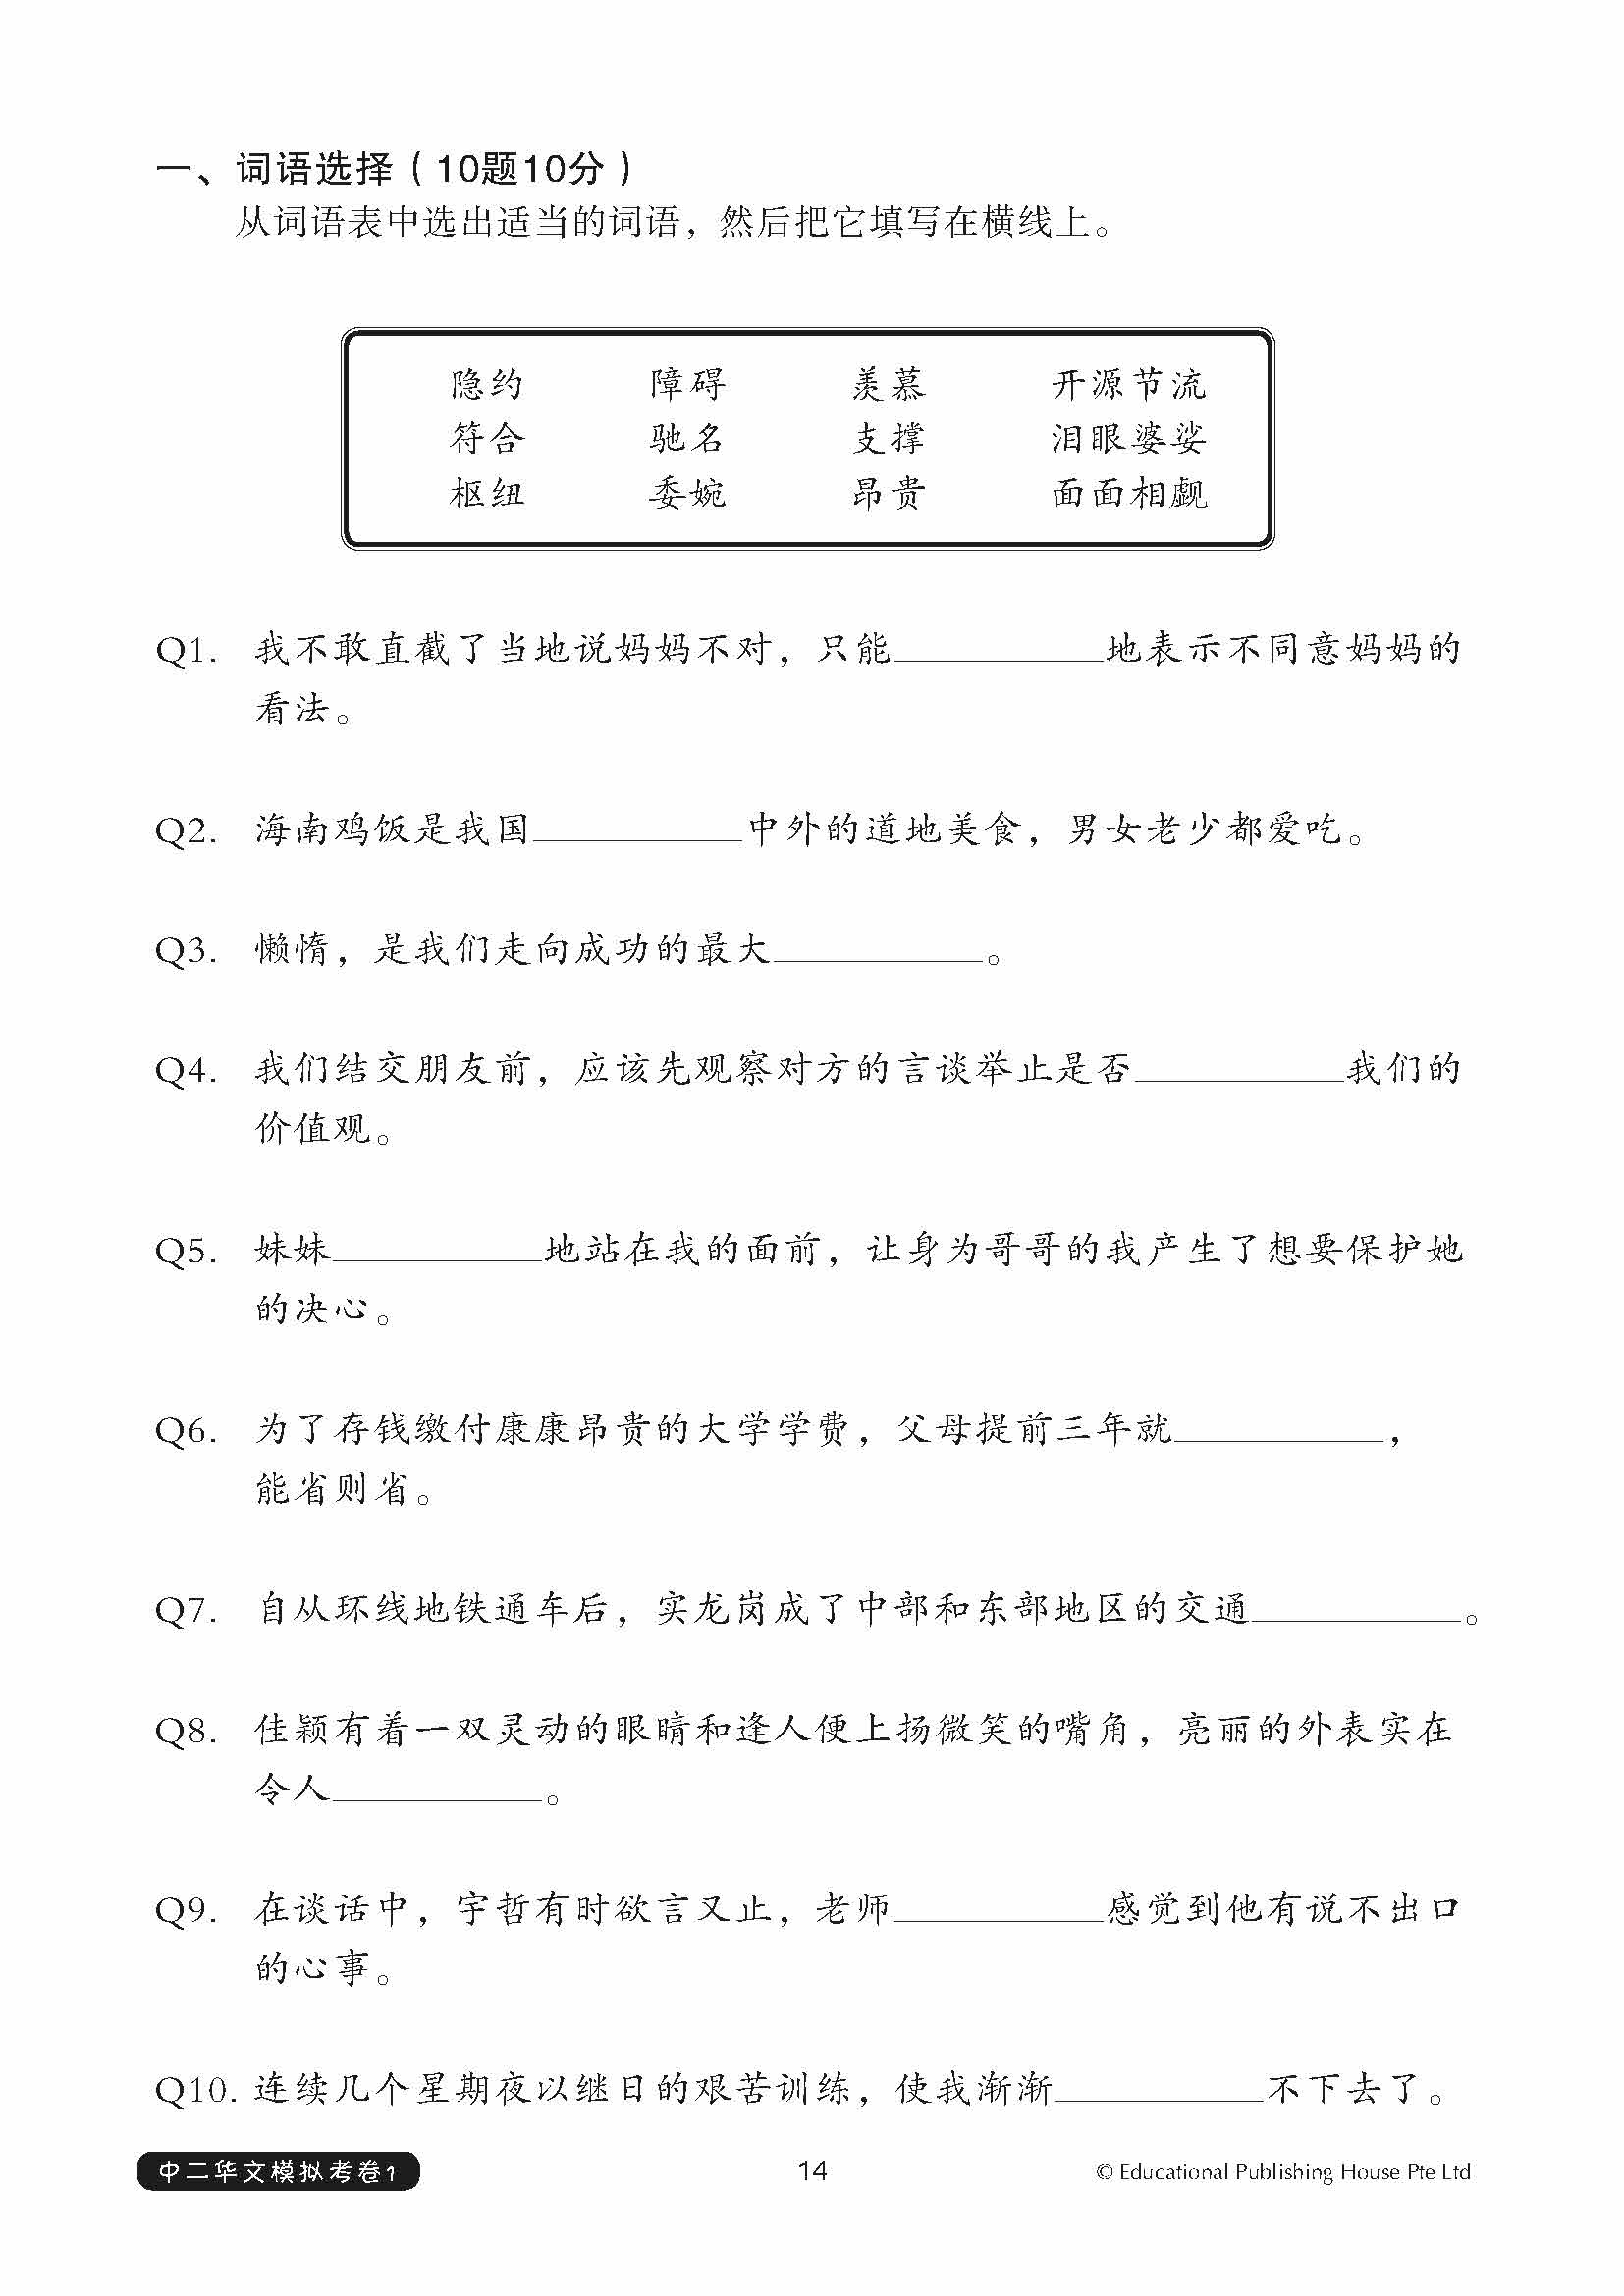 Secondary 2 (G3) Chinese Exam Complete Papers 1-3 QR - _MS, EDUCATIONAL PUBLISHING HOUSE